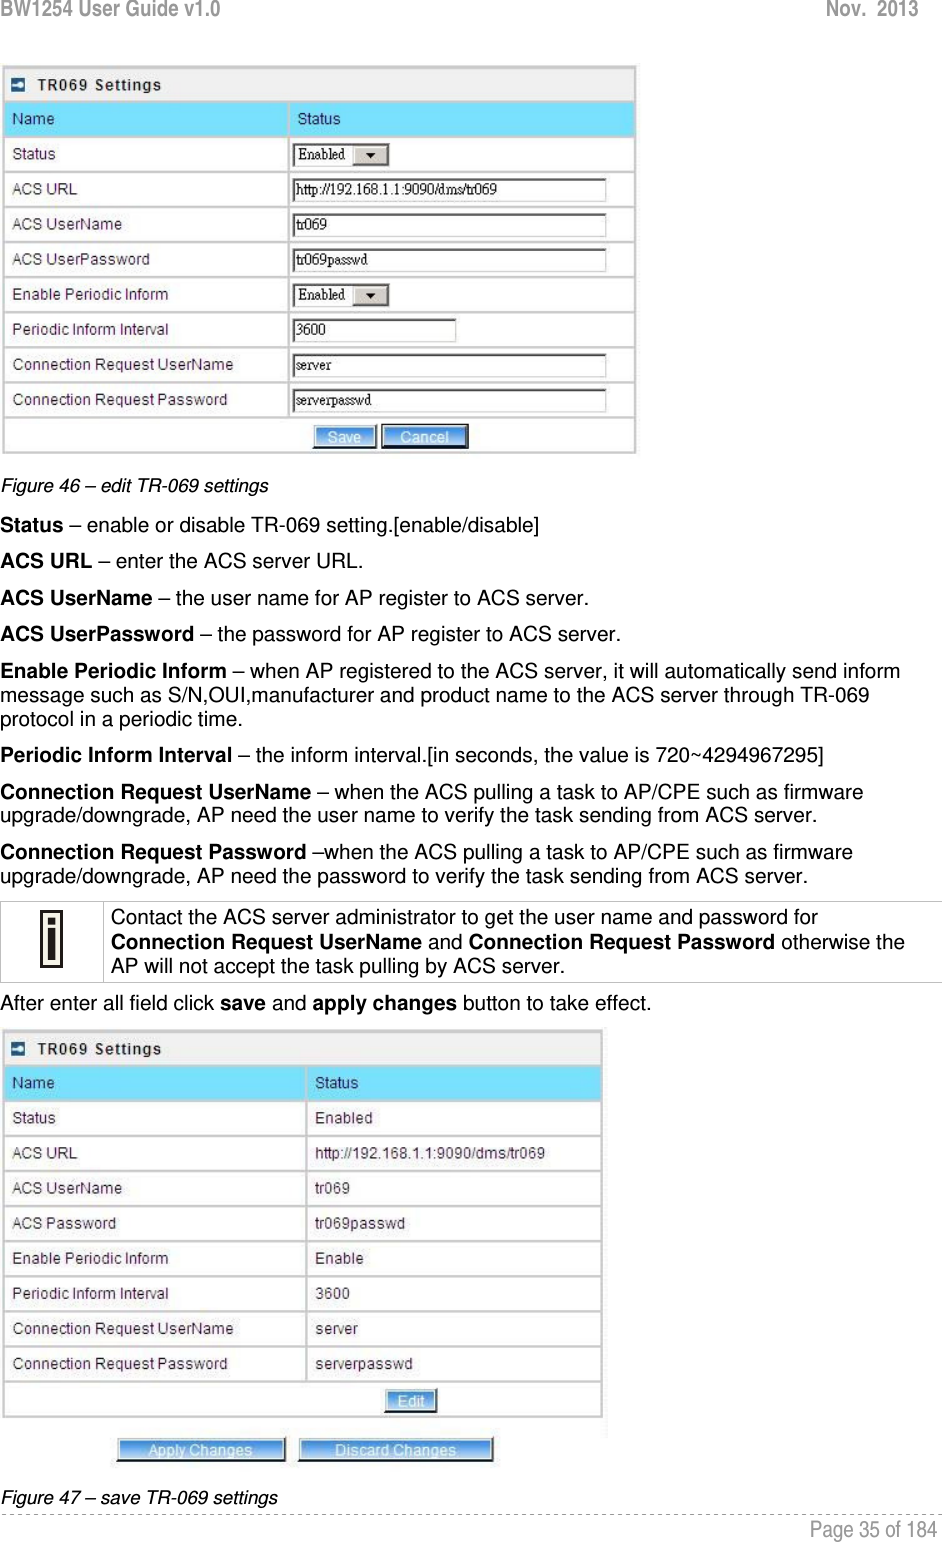 BW1254 User Guide v1.0  Nov.  2013     Page 35 of 184    Figure 46 – edit TR-069 settings Status – enable or disable TR-069 setting.[enable/disable] ACS URL – enter the ACS server URL. ACS UserName – the user name for AP register to ACS server. ACS UserPassword – the password for AP register to ACS server. Enable Periodic Inform – when AP registered to the ACS server, it will automatically send inform message such as S/N,OUI,manufacturer and product name to the ACS server through TR-069 protocol in a periodic time. Periodic Inform Interval – the inform interval.[in seconds, the value is 720~4294967295] Connection Request UserName – when the ACS pulling a task to AP/CPE such as firmware upgrade/downgrade, AP need the user name to verify the task sending from ACS server. Connection Request Password –when the ACS pulling a task to AP/CPE such as firmware upgrade/downgrade, AP need the password to verify the task sending from ACS server.  Contact the ACS server administrator to get the user name and password for Connection Request UserName and Connection Request Password otherwise the AP will not accept the task pulling by ACS server. After enter all field click save and apply changes button to take effect.  Figure 47 – save TR-069 settings 